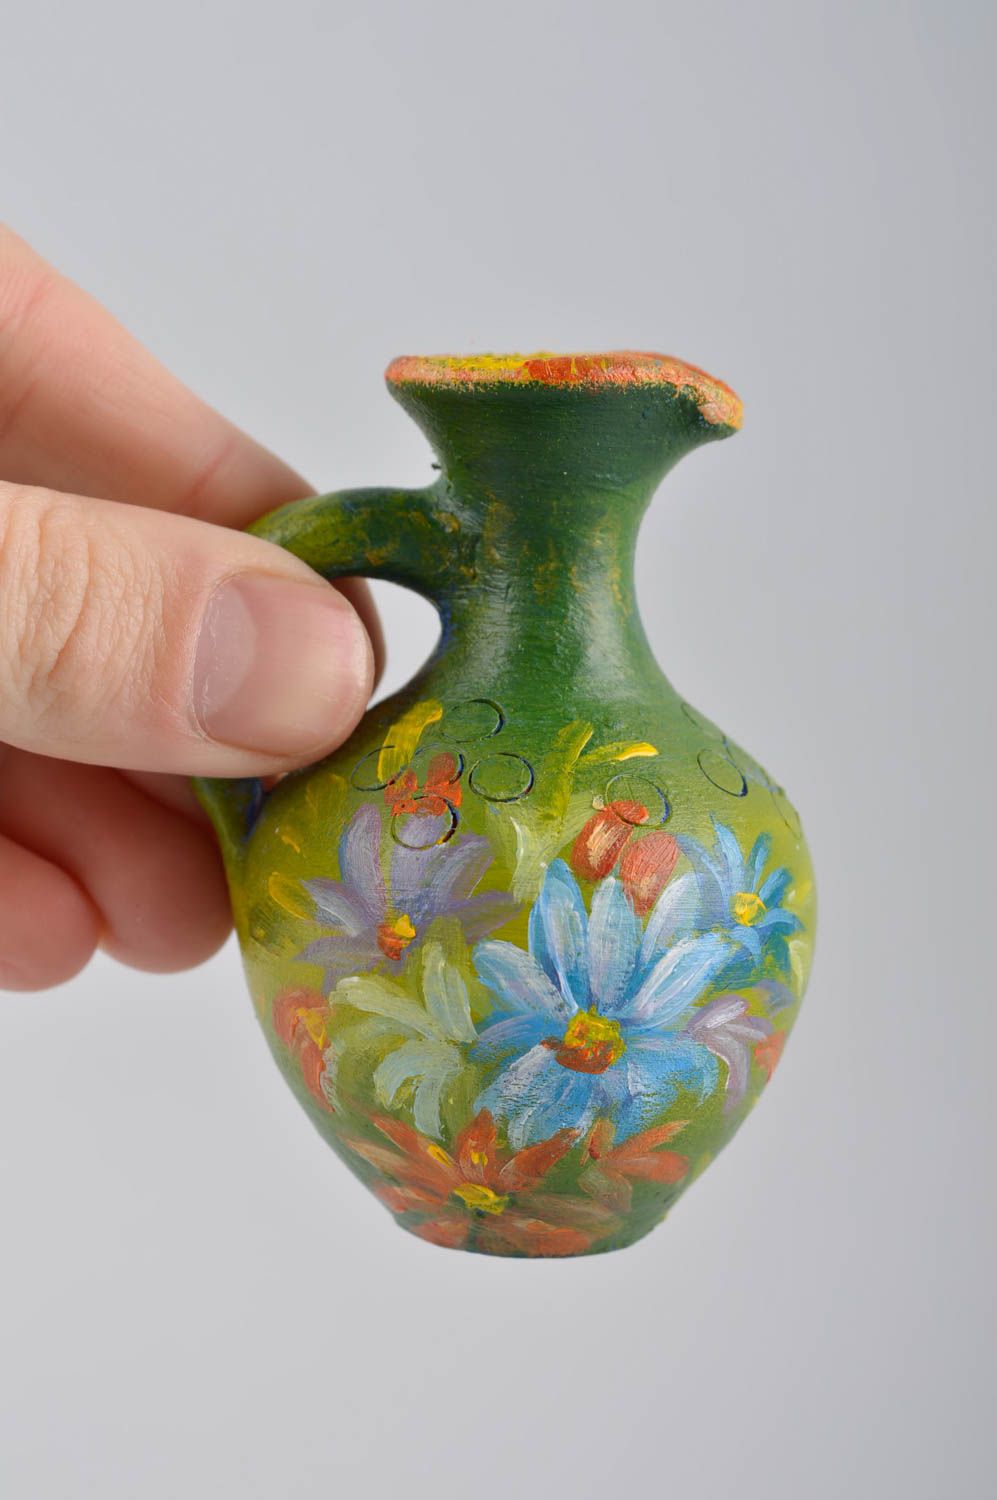 Handmade eco-style hand-painted ceramic pitcher flower vase 4 inches, 0,19 lb photo 5